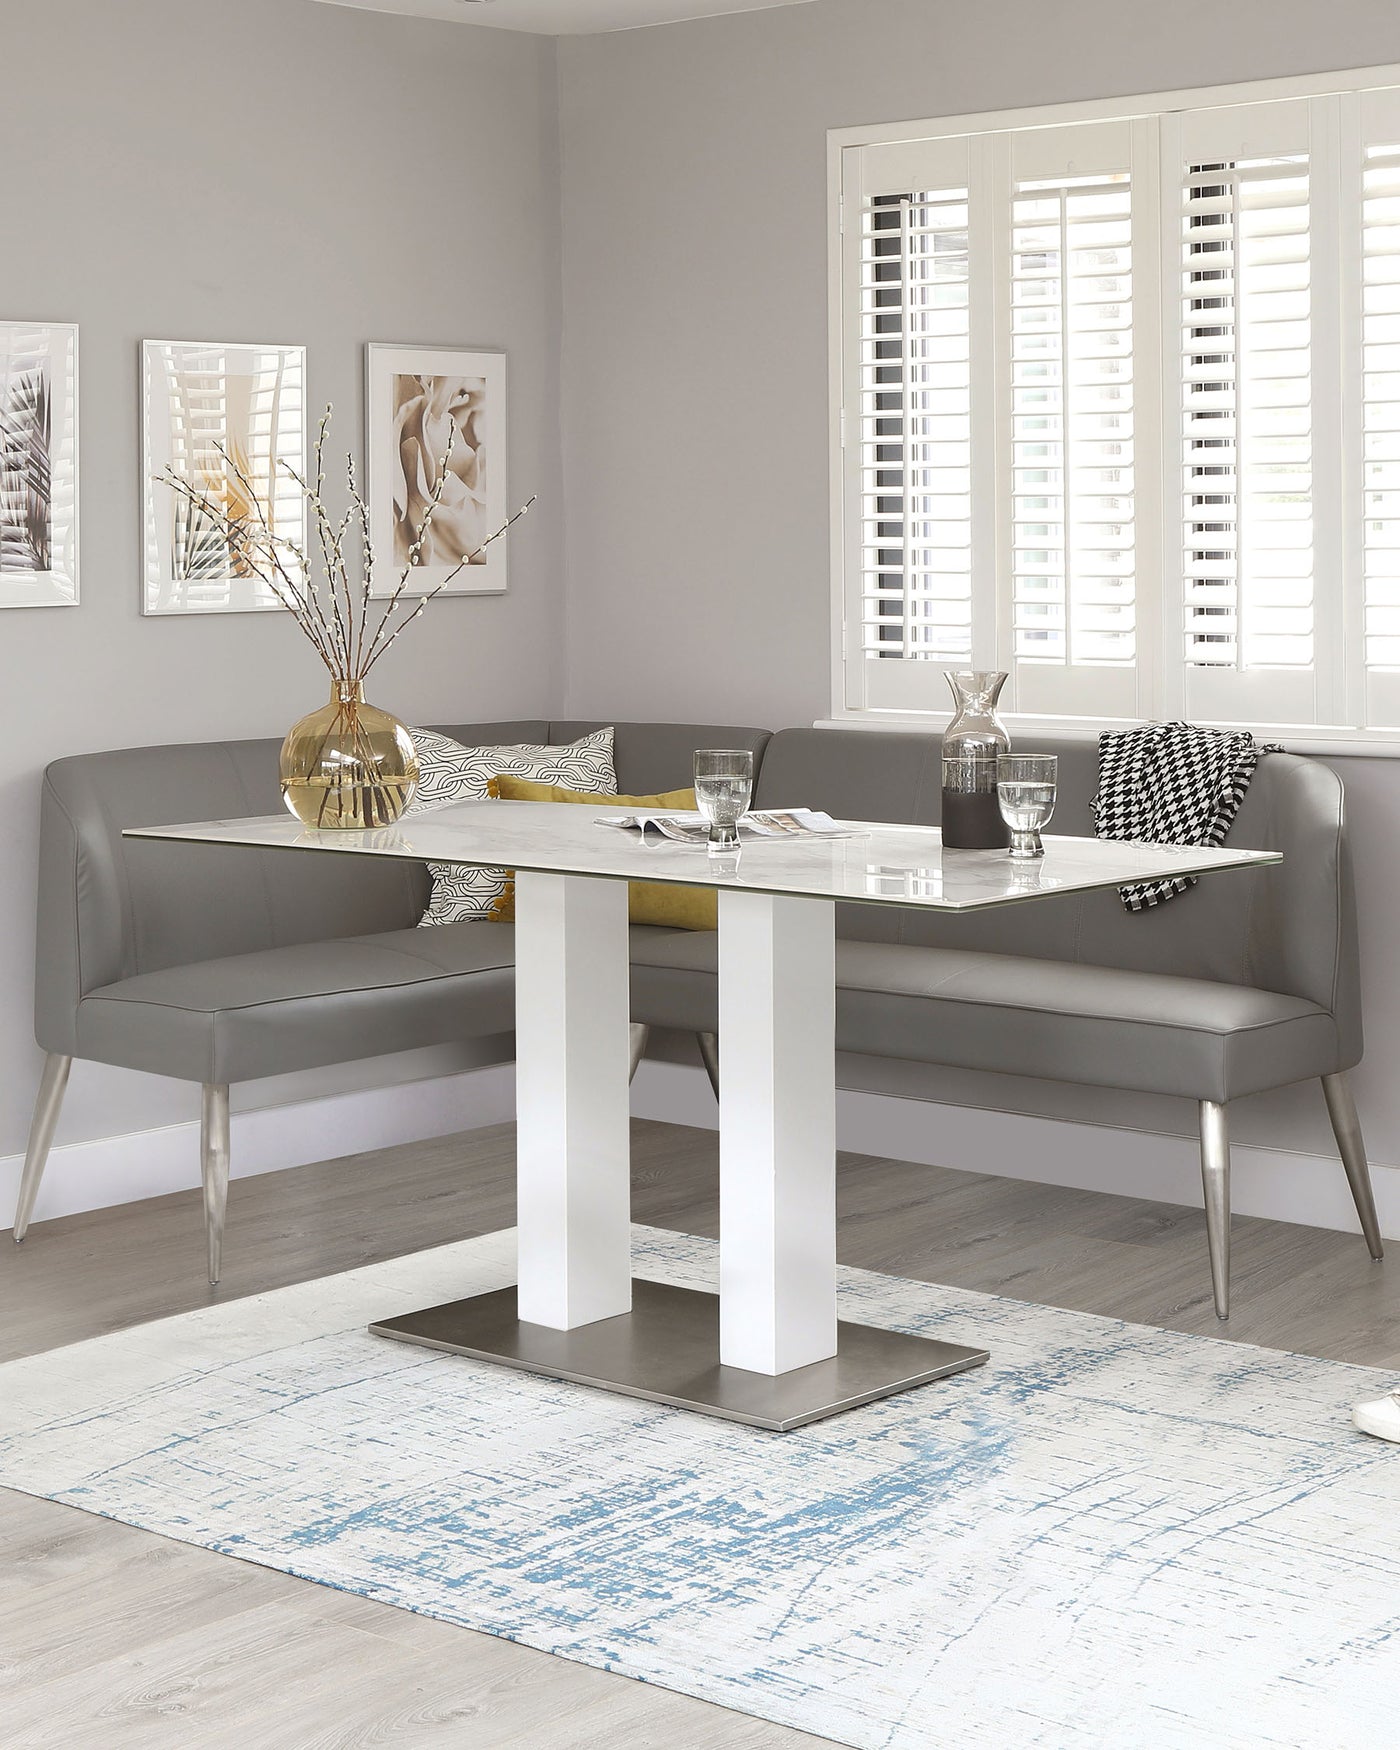 Modern dining area featuring a rectangular table with a glossy white finish and metallic silver legs, paired with a long, grey upholstered bench with sleek lines and silver metallic legs. The setting is accented with contemporary home decor and situated on a distressed blue and white area rug.